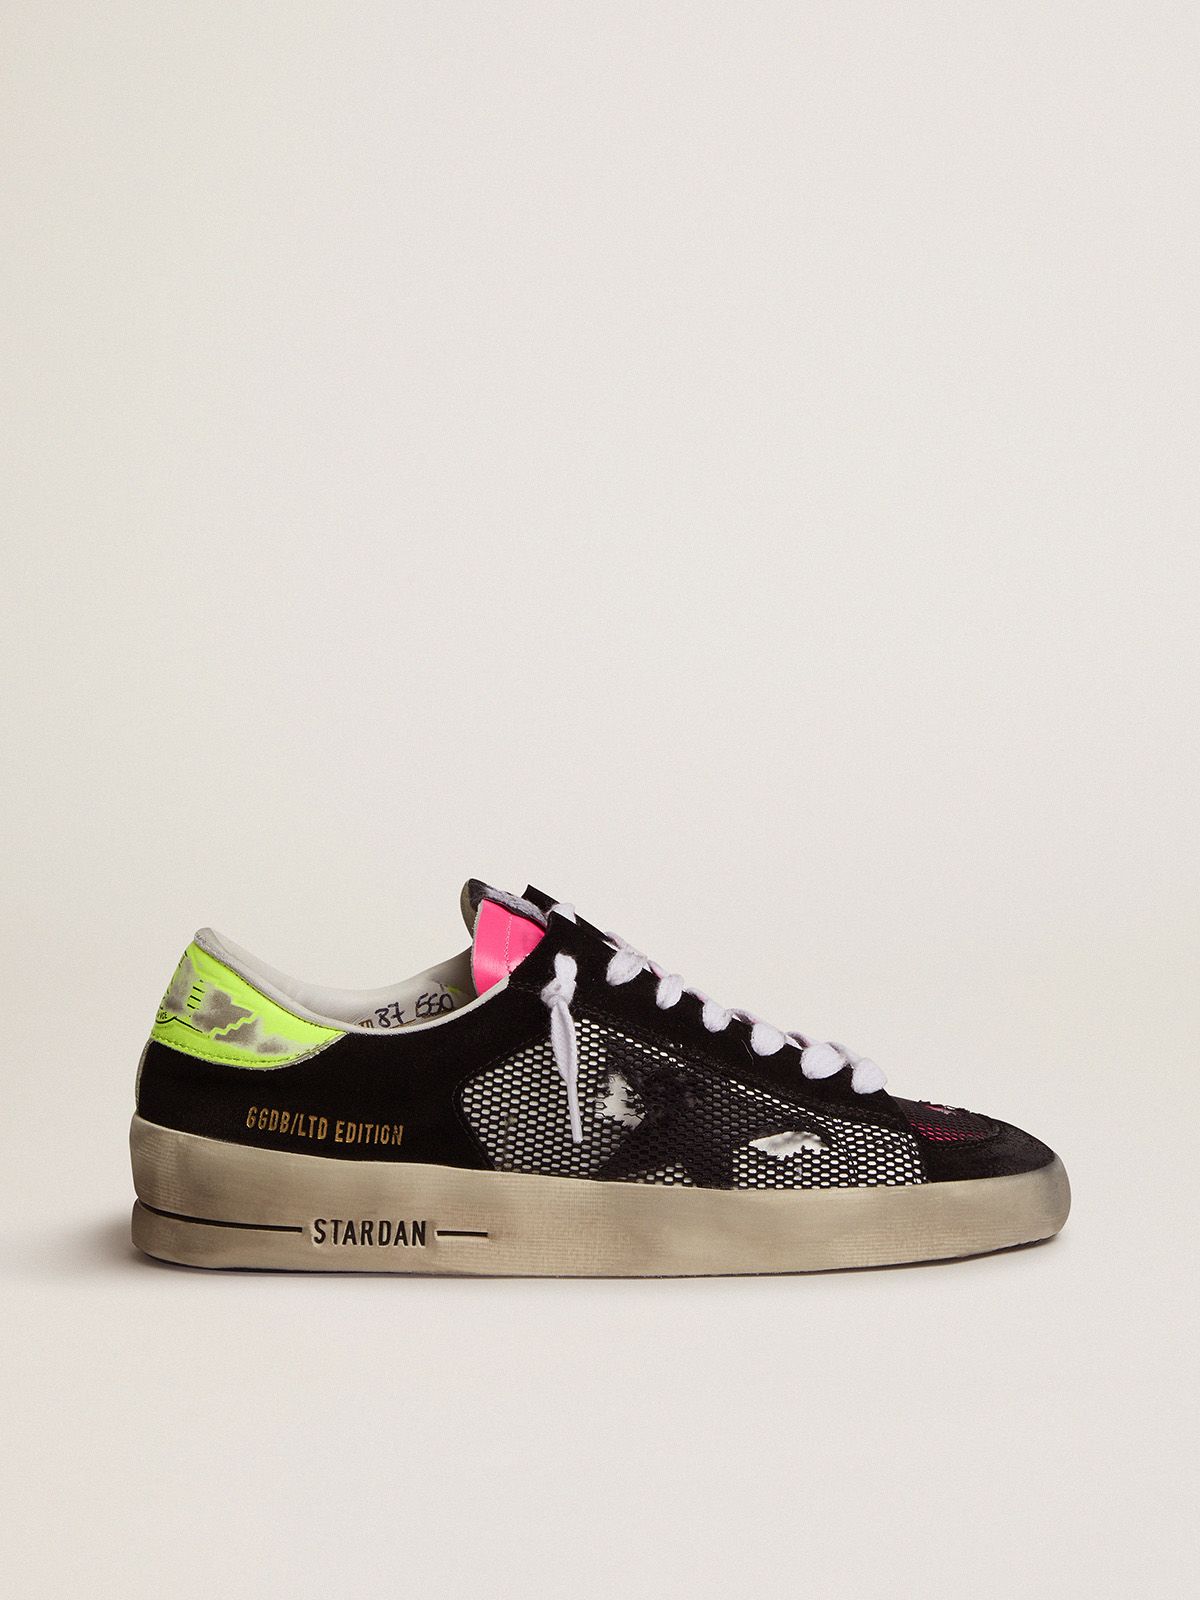 golden goose Edition fuchsia yellow Women’s Stardan in and sneakers Limited